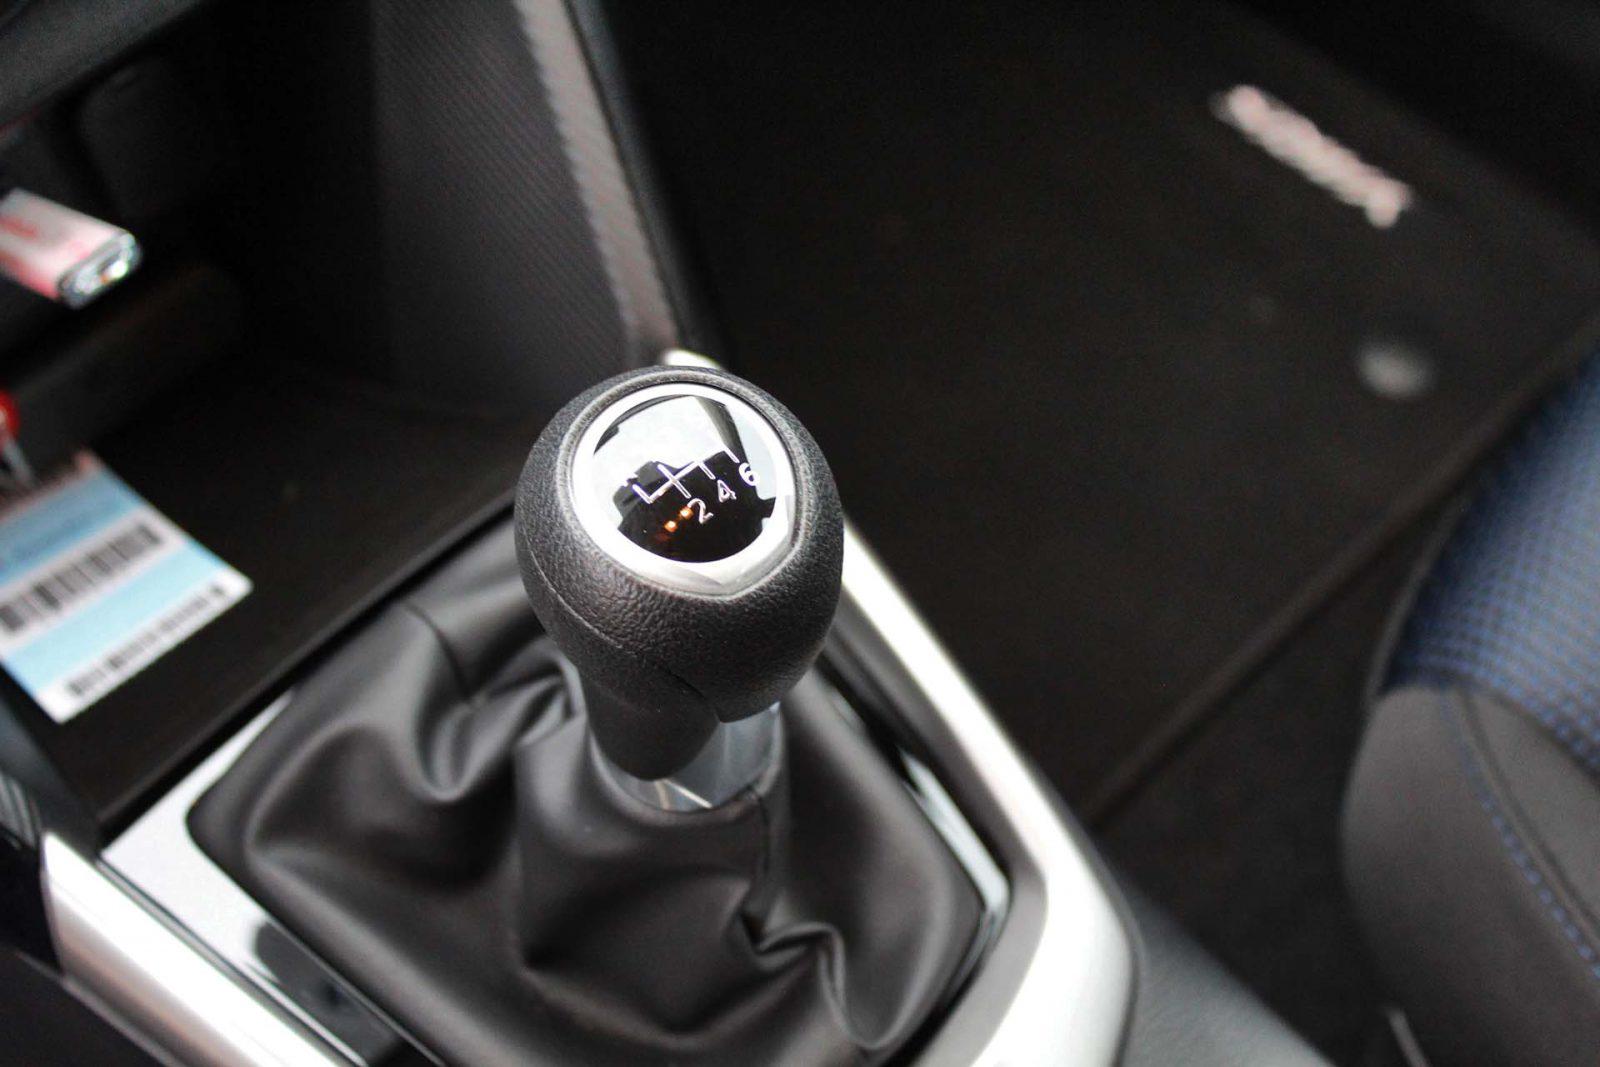 How Manual Transmissions Work Explained in an Easy Way